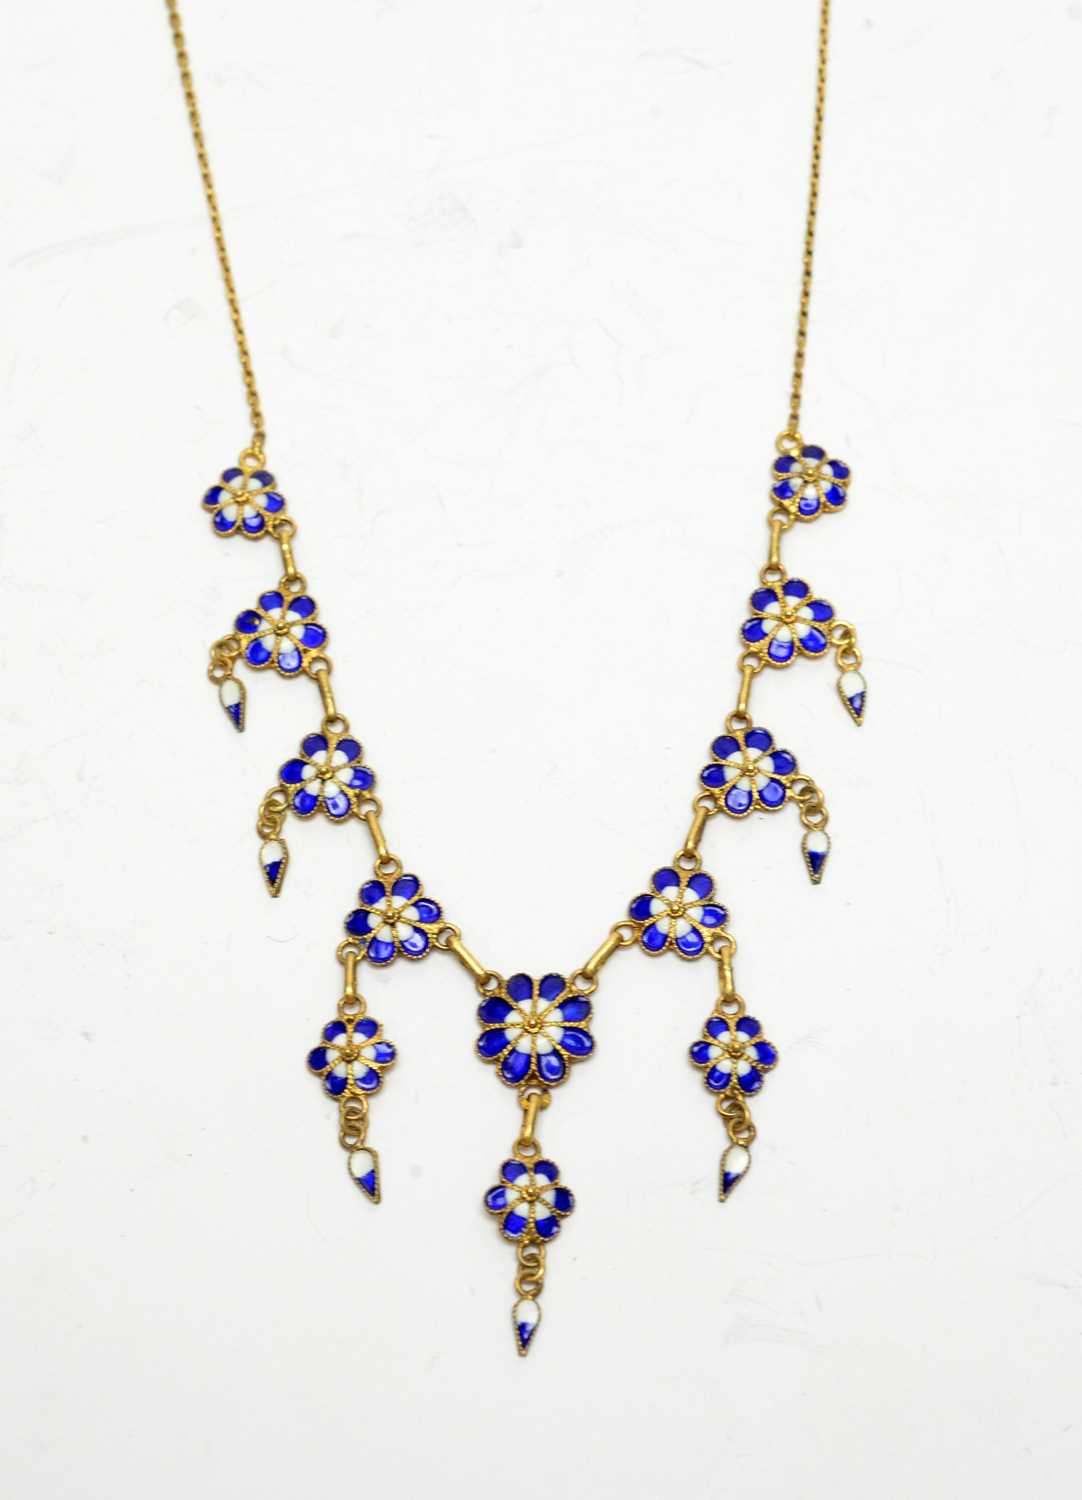 Lot 195 - An early 20th century yellow-metal and enamel forget-me-not necklace.